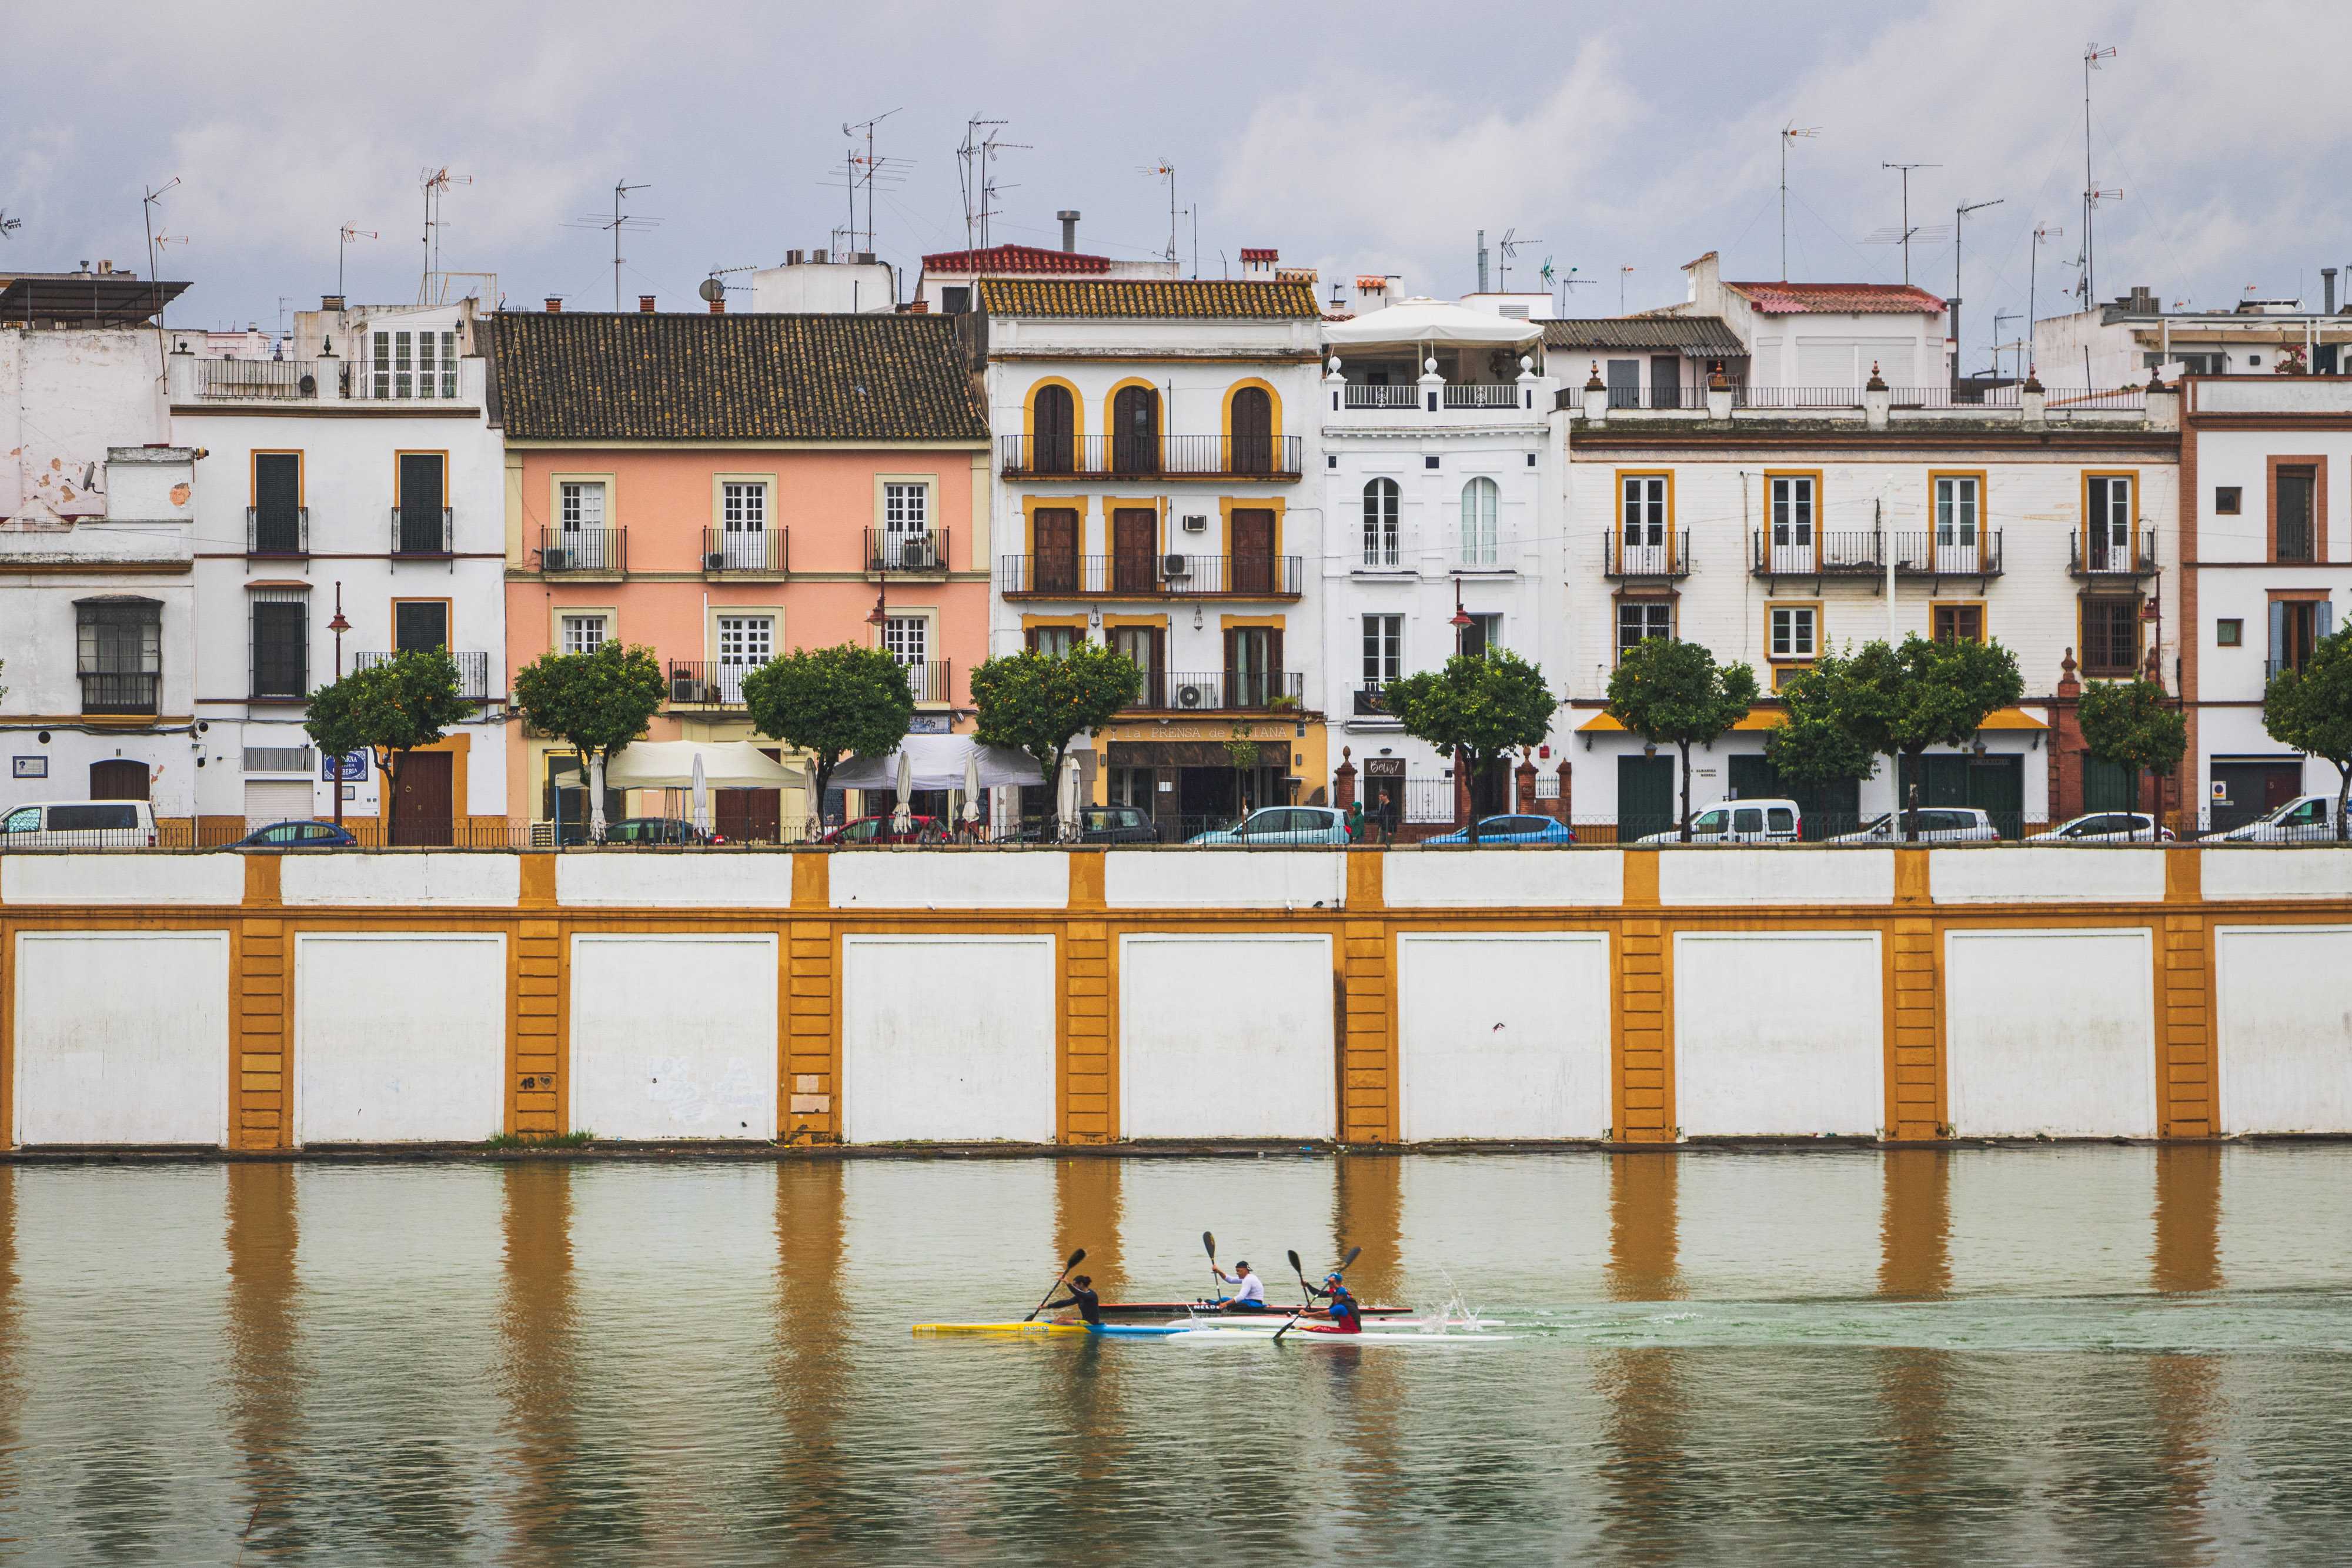 Three men on small kayaks are padding down a river, while behind them the white painted river wall and colorful tile-roofed buildings of Triana, one of the oldest neighborhoods in Sevilla, Spain.